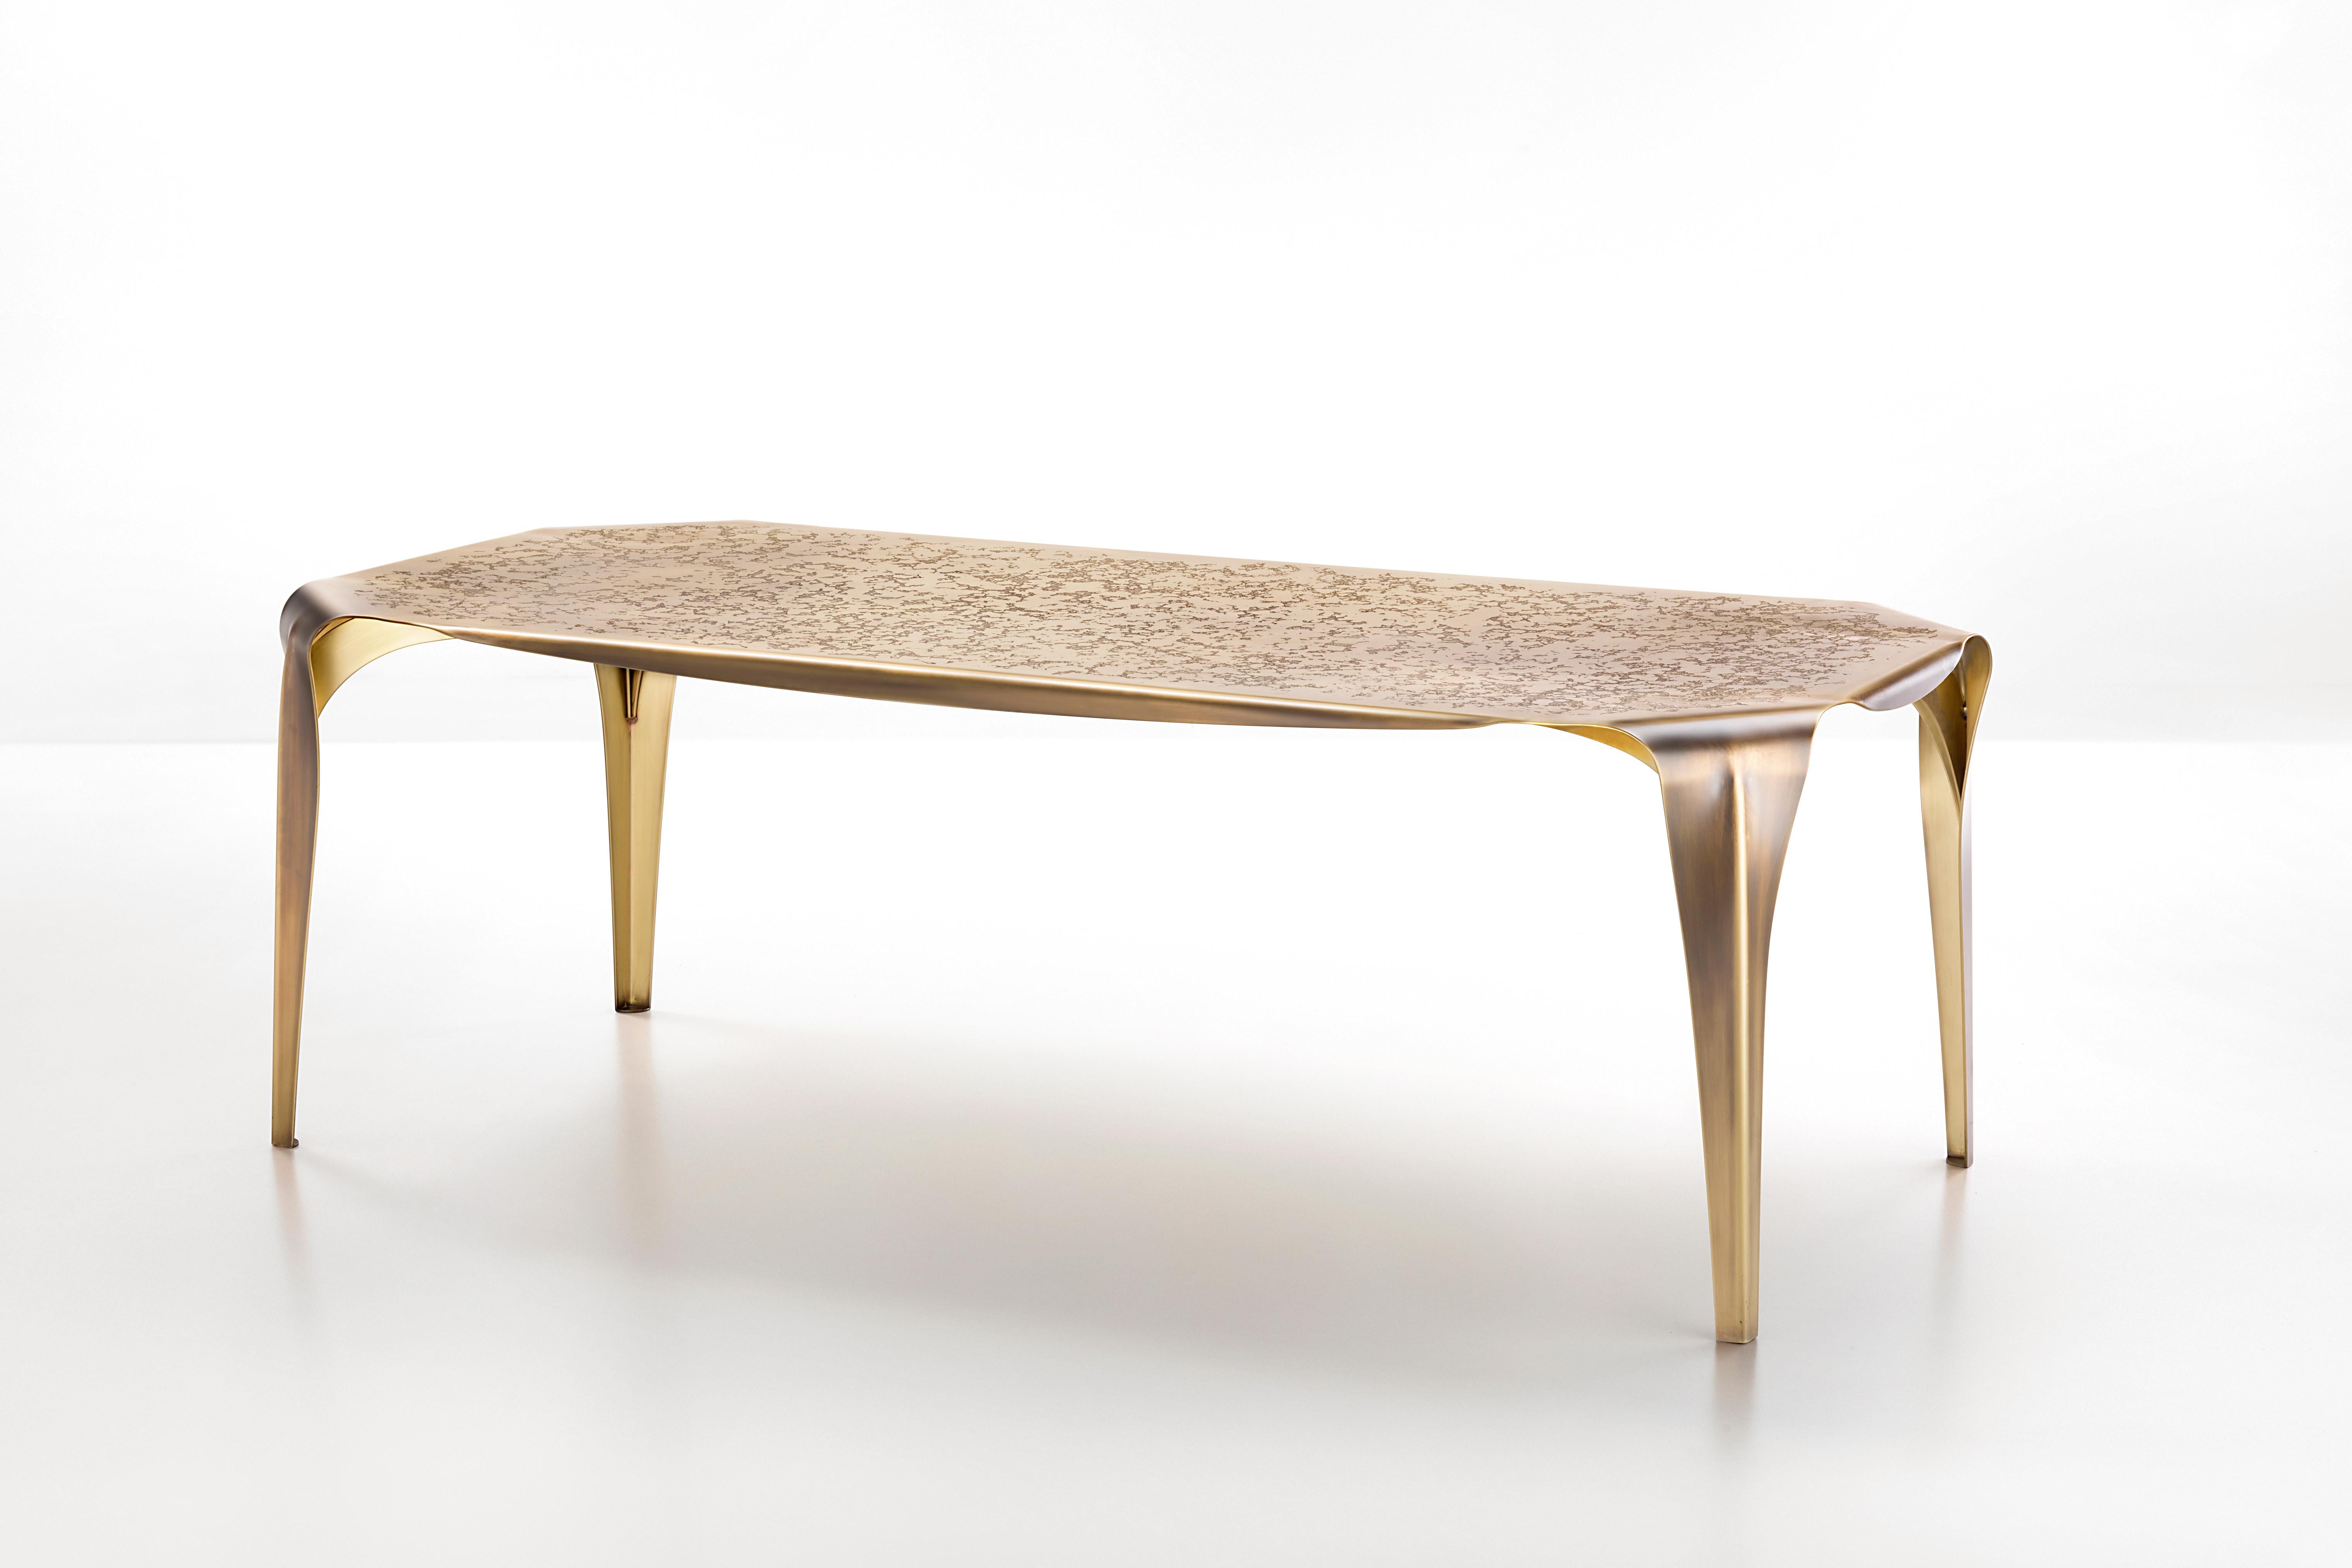 Precious as a jewel, Convivium is a sculptural table that steals centre stage by studding itself with light. Made entirely of brass, it is shaped to ensure stability and resilience, thanks to the discreetly Art Nouveau creases. Like a leaf, it folds